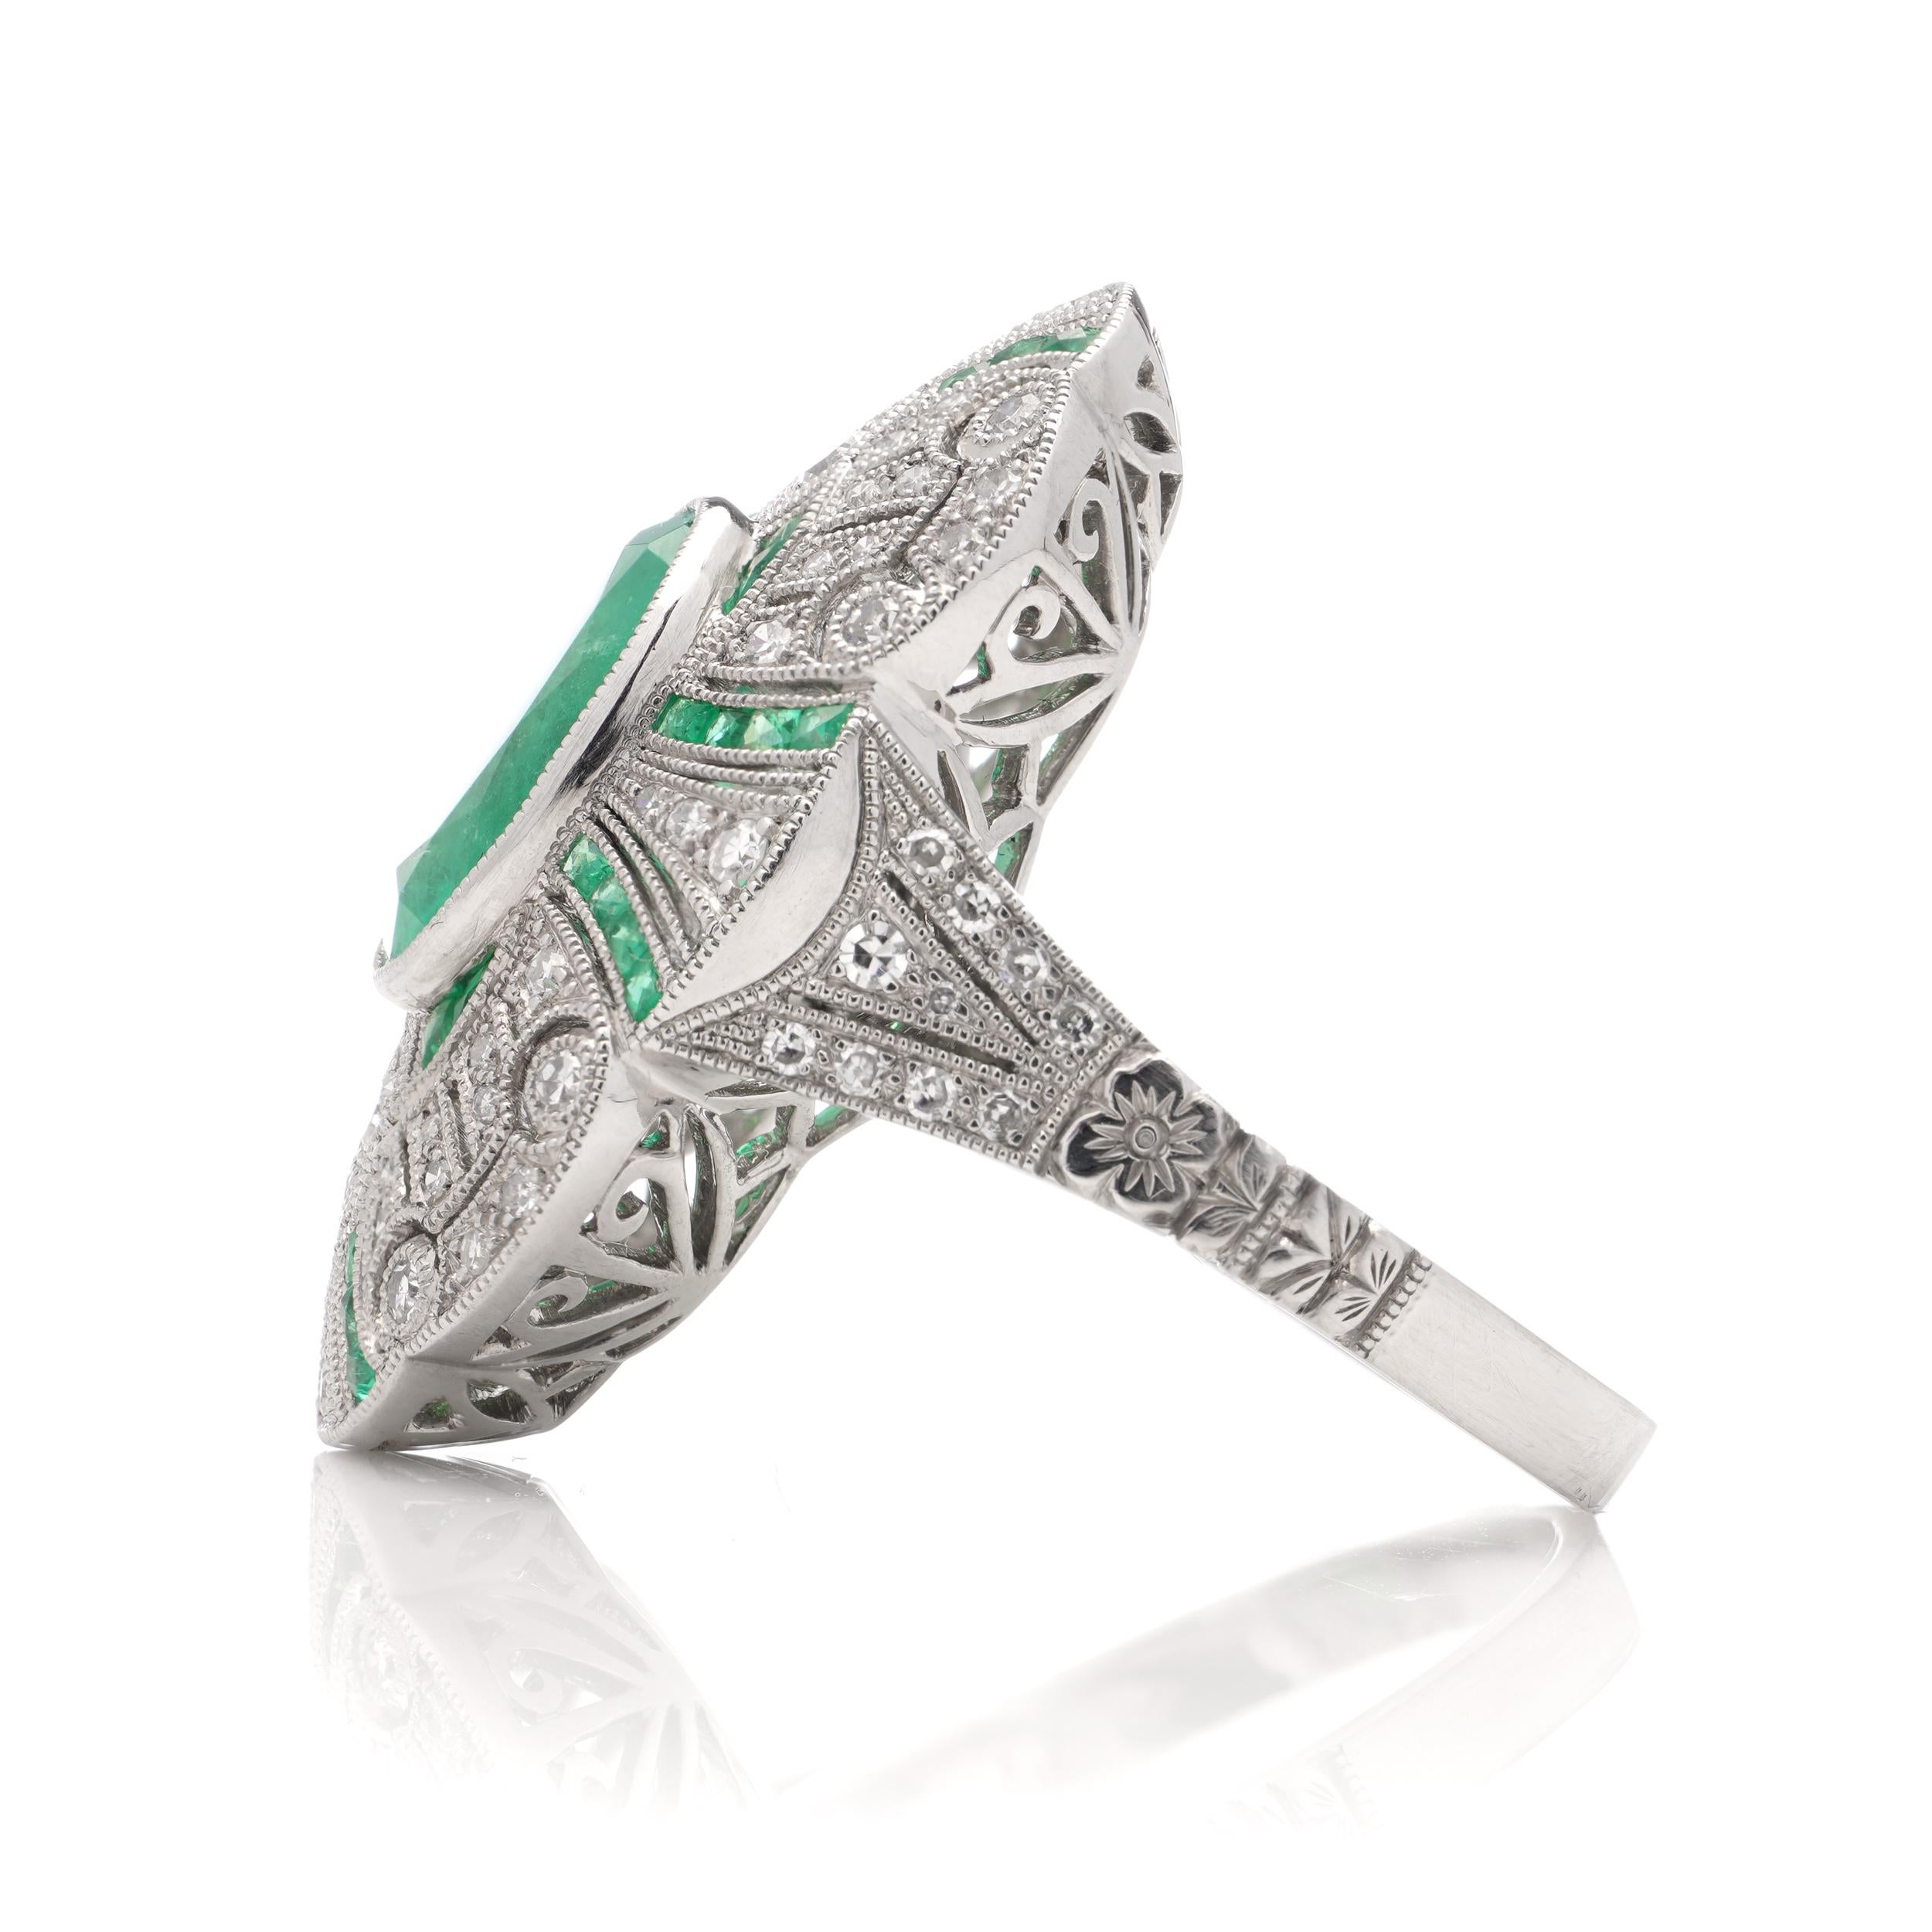 Platinum Art Deco-inspired 3.62 carats of Emerald fashion ring For Sale 1